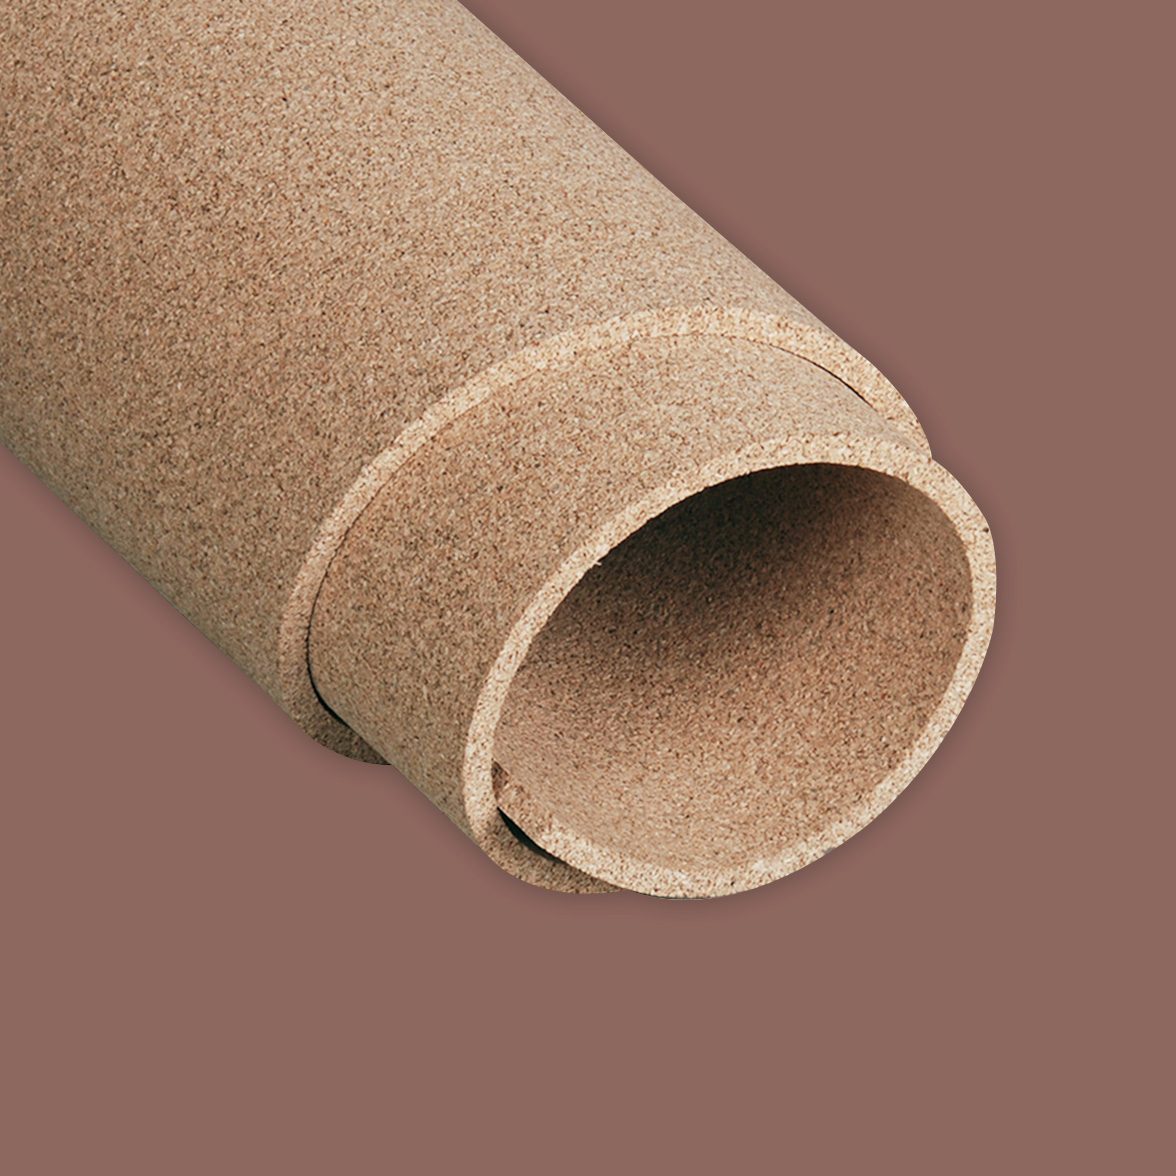 Cork Roll 4' x 25' x 3/8" 438025-R Proudly Made in USA by Manton Cork 